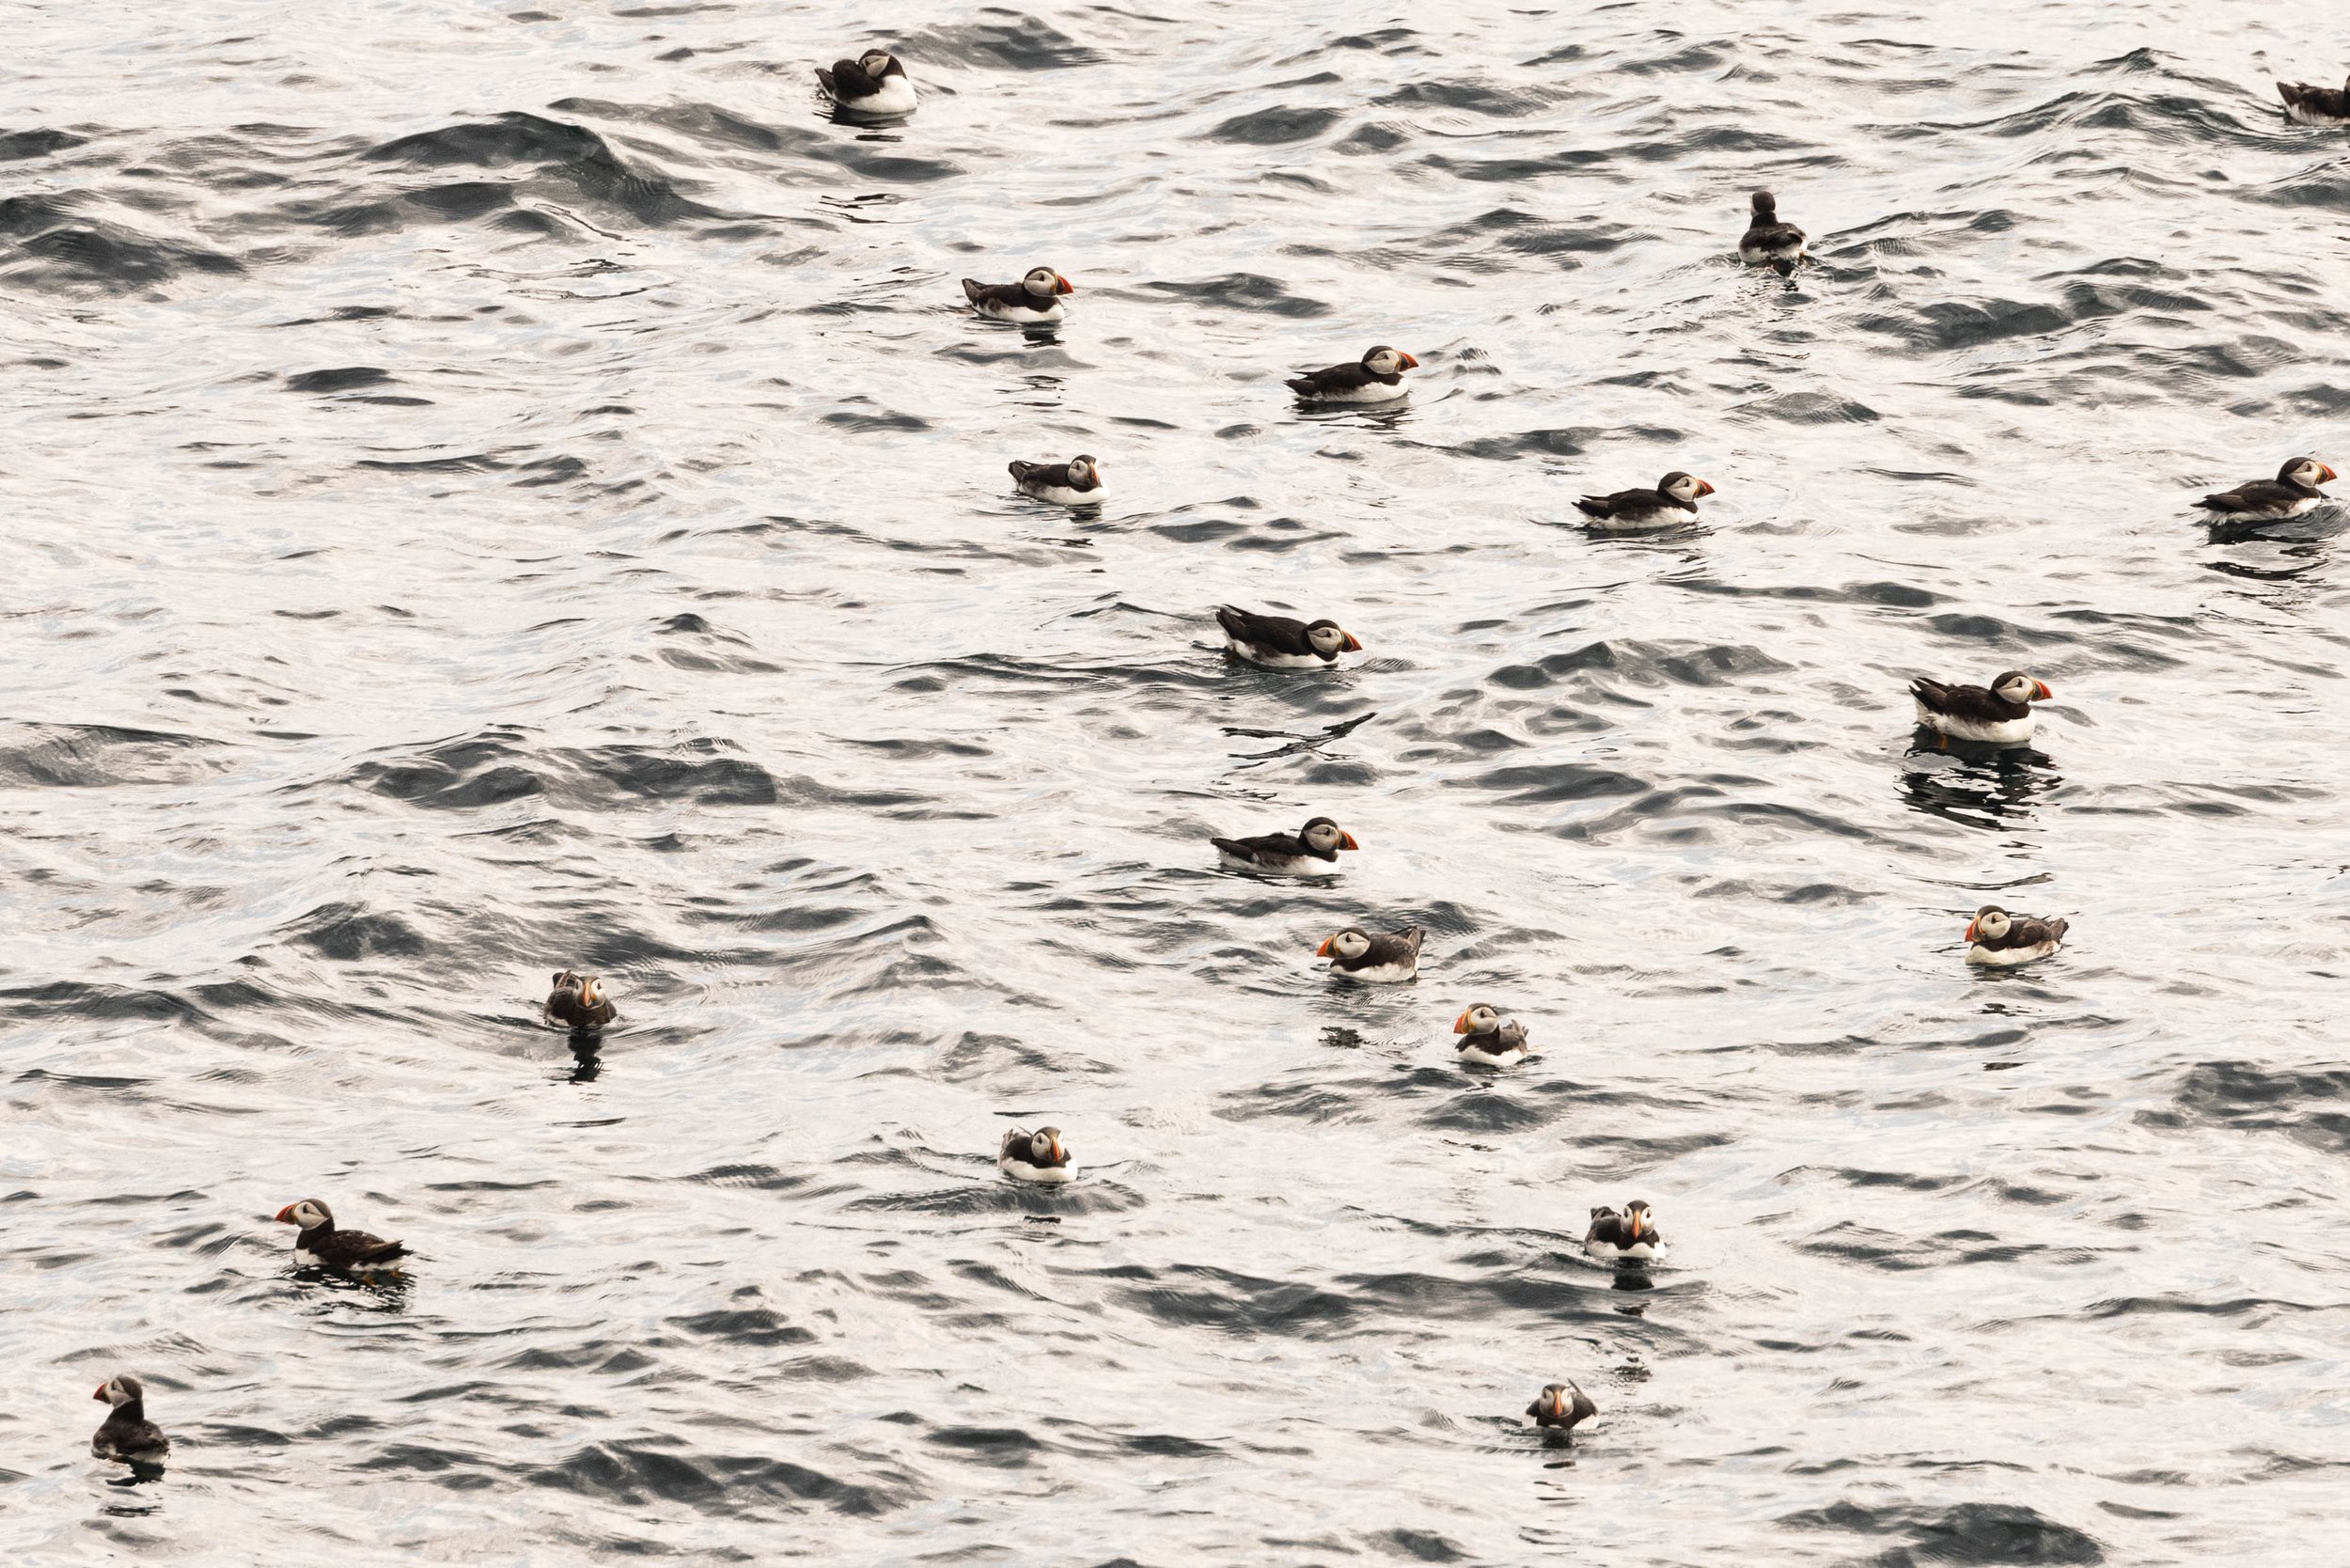 puffins on the water landscape_.jpg